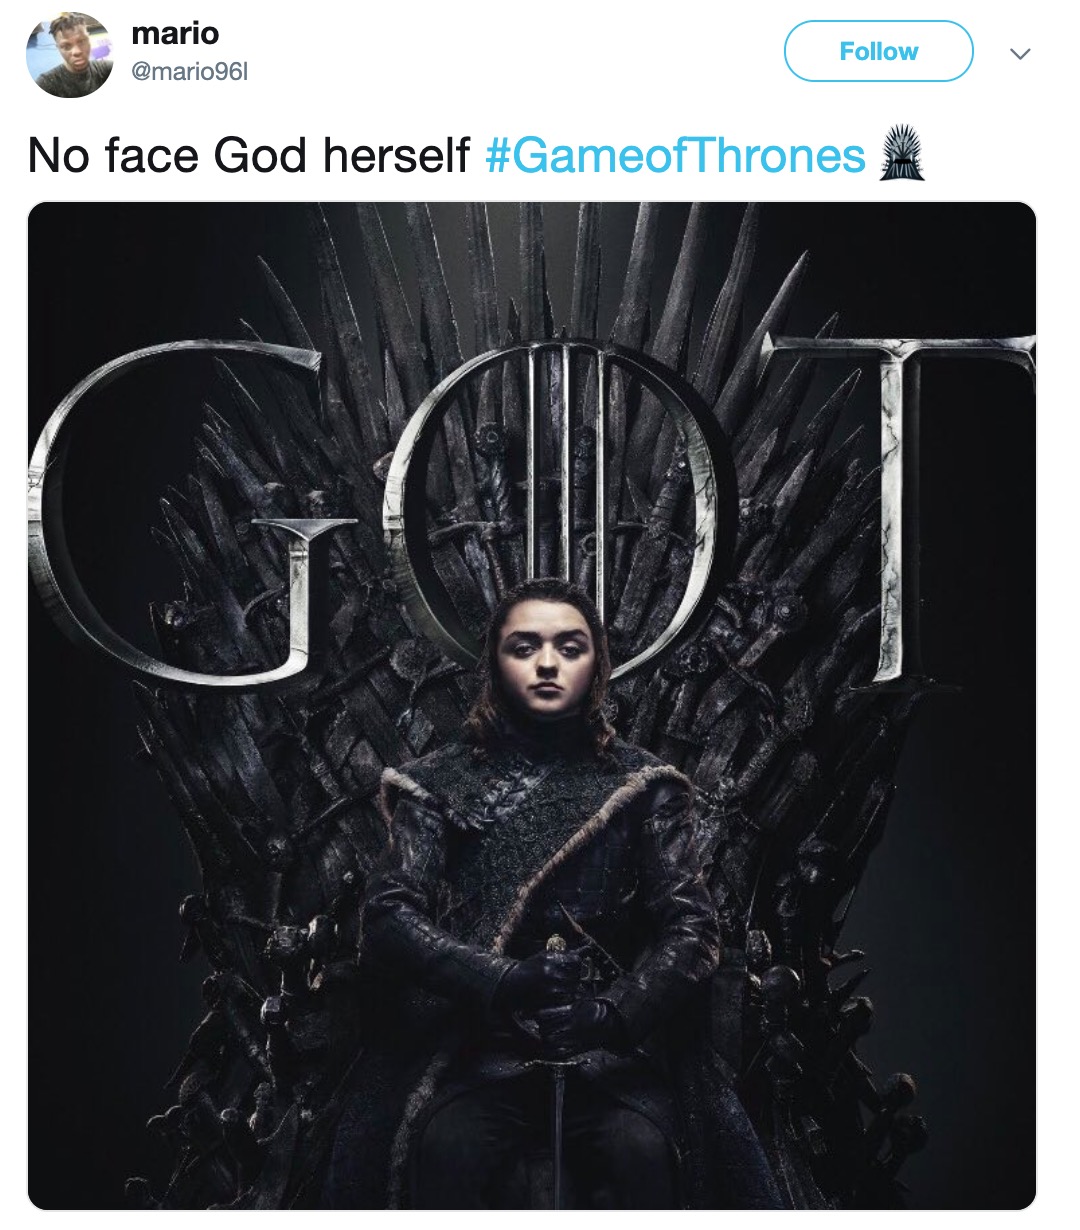 Game of Thrones memes - Battle for Winterfell - game of thrones season 8 poster - mario 1 No face God herself